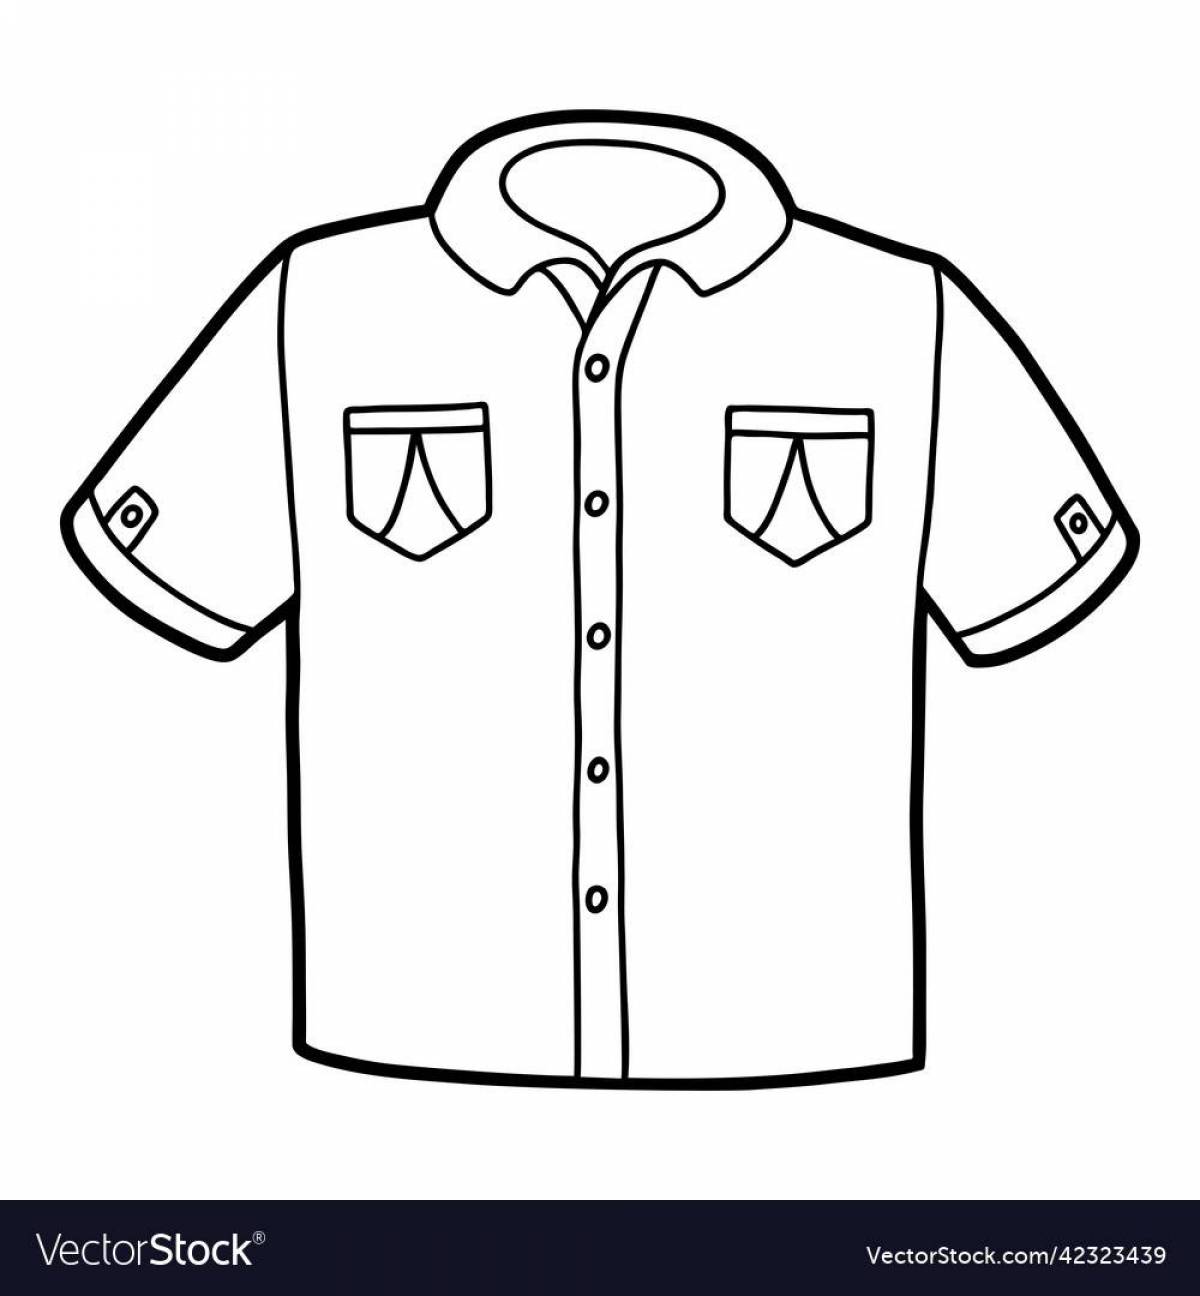 Radiant coloring page shirt